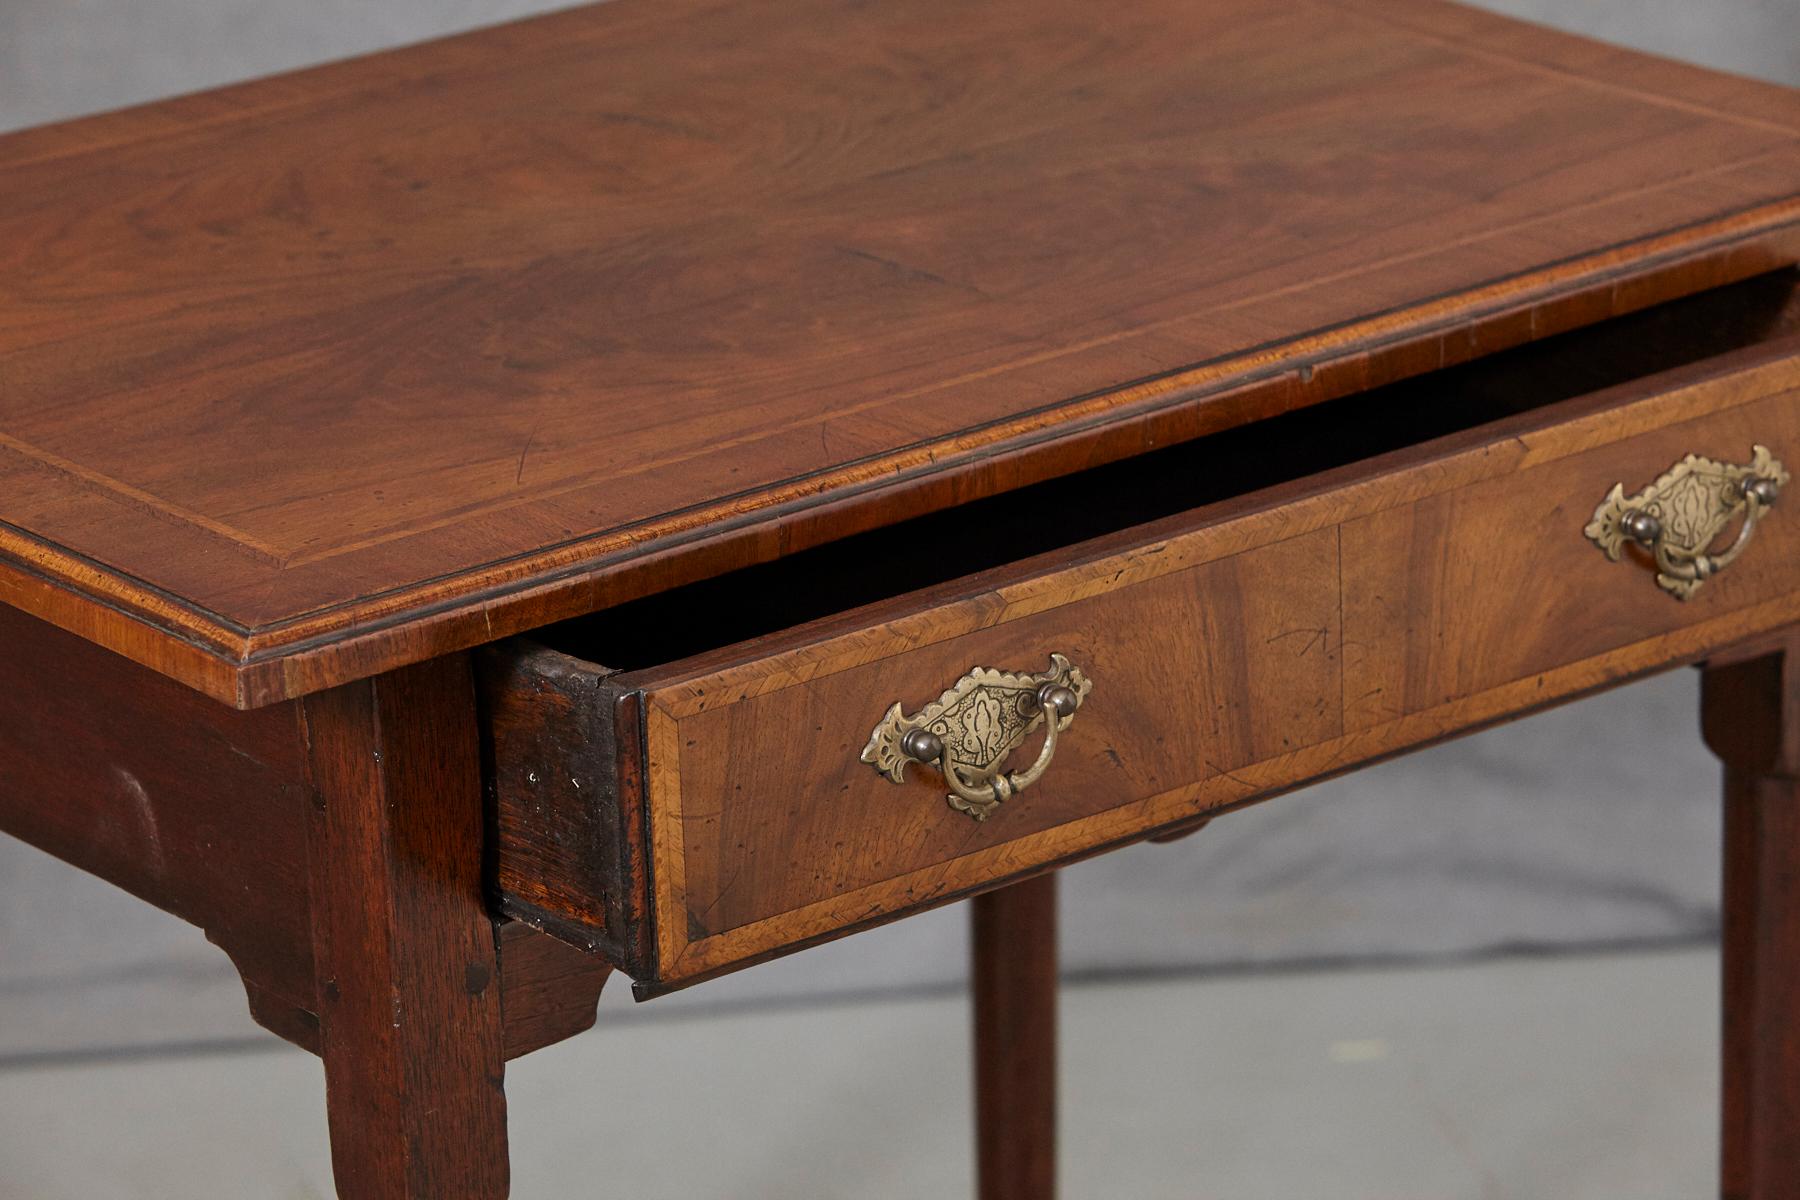 Queen Anne Style Walnut Side Table with Wood Inlays and Brass Hardware 1